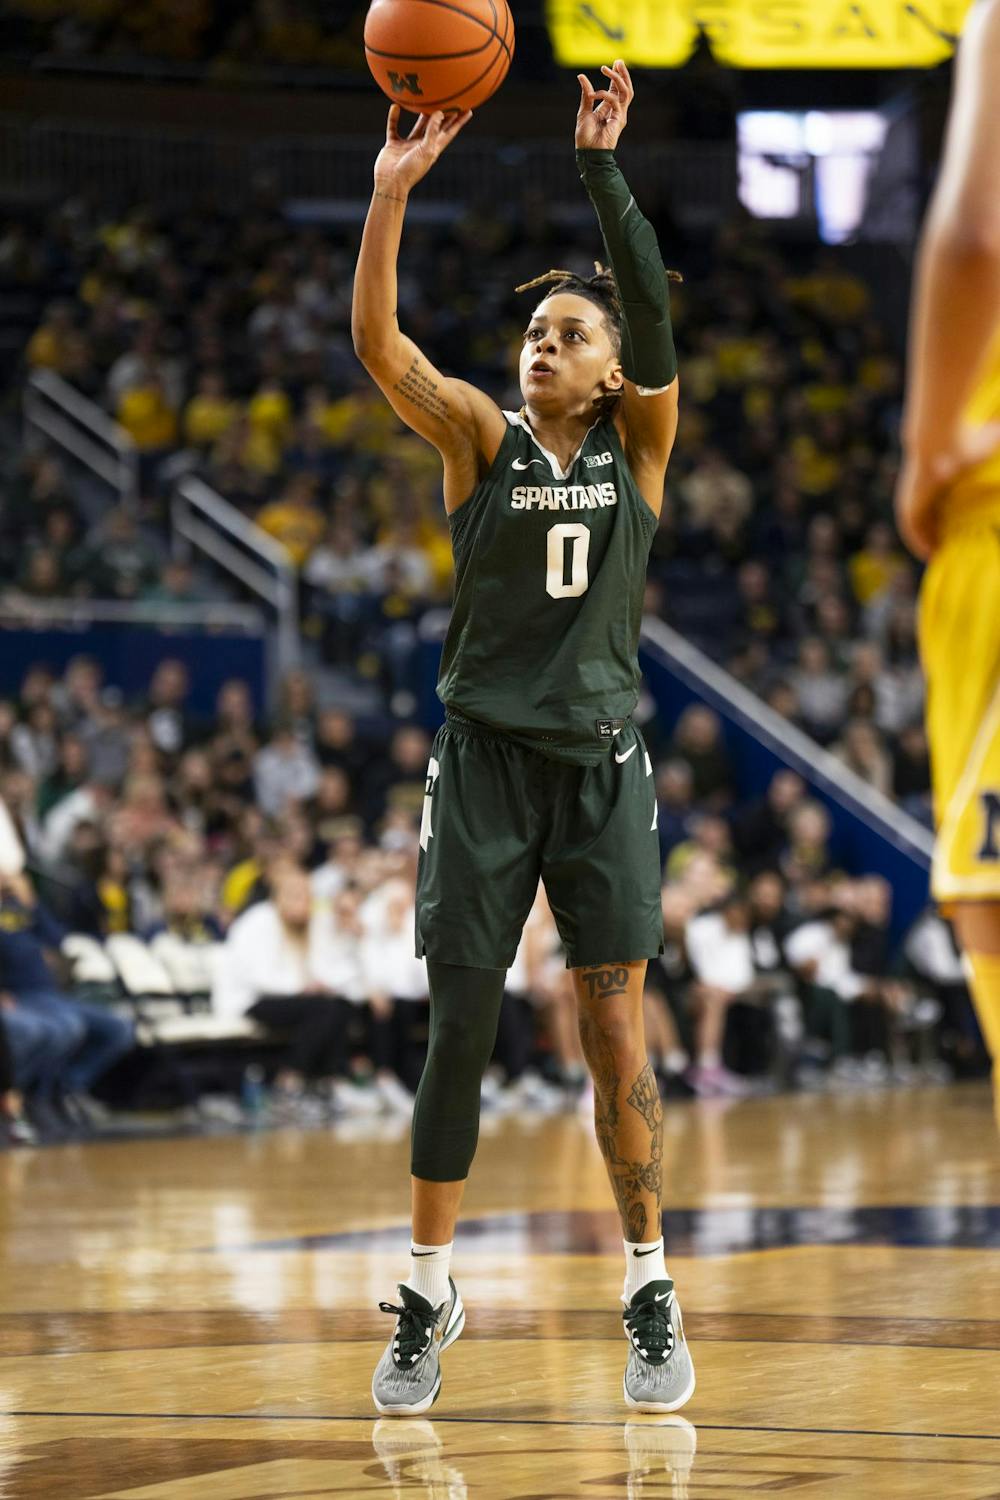 The Michigan State University women's basketball team takes on University of Michigan at the Crisler Center in Ann Arbor on Feb. 18, 2024. The Michigan State team is looking to snap a two-game losing streak against the rival Wolverines.